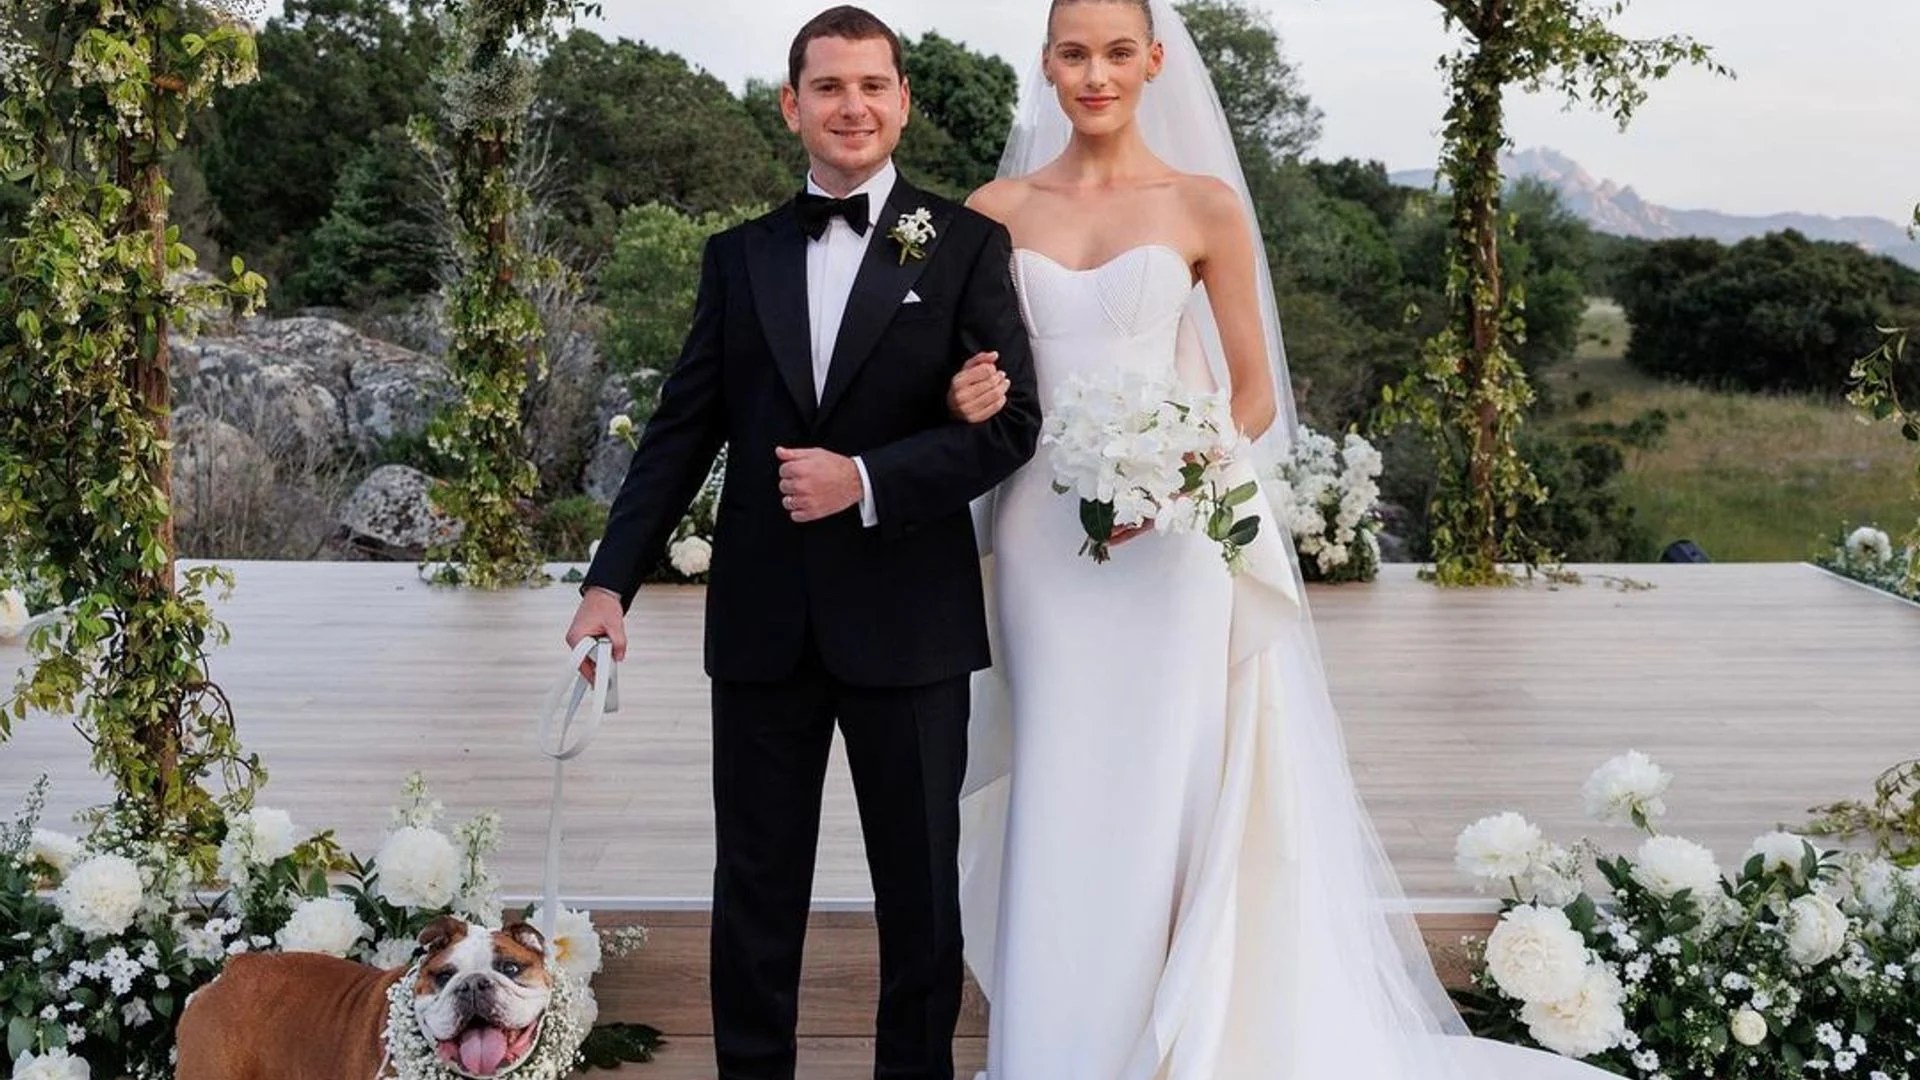 Inside the opulent billionaire's wedding that sparked the connection